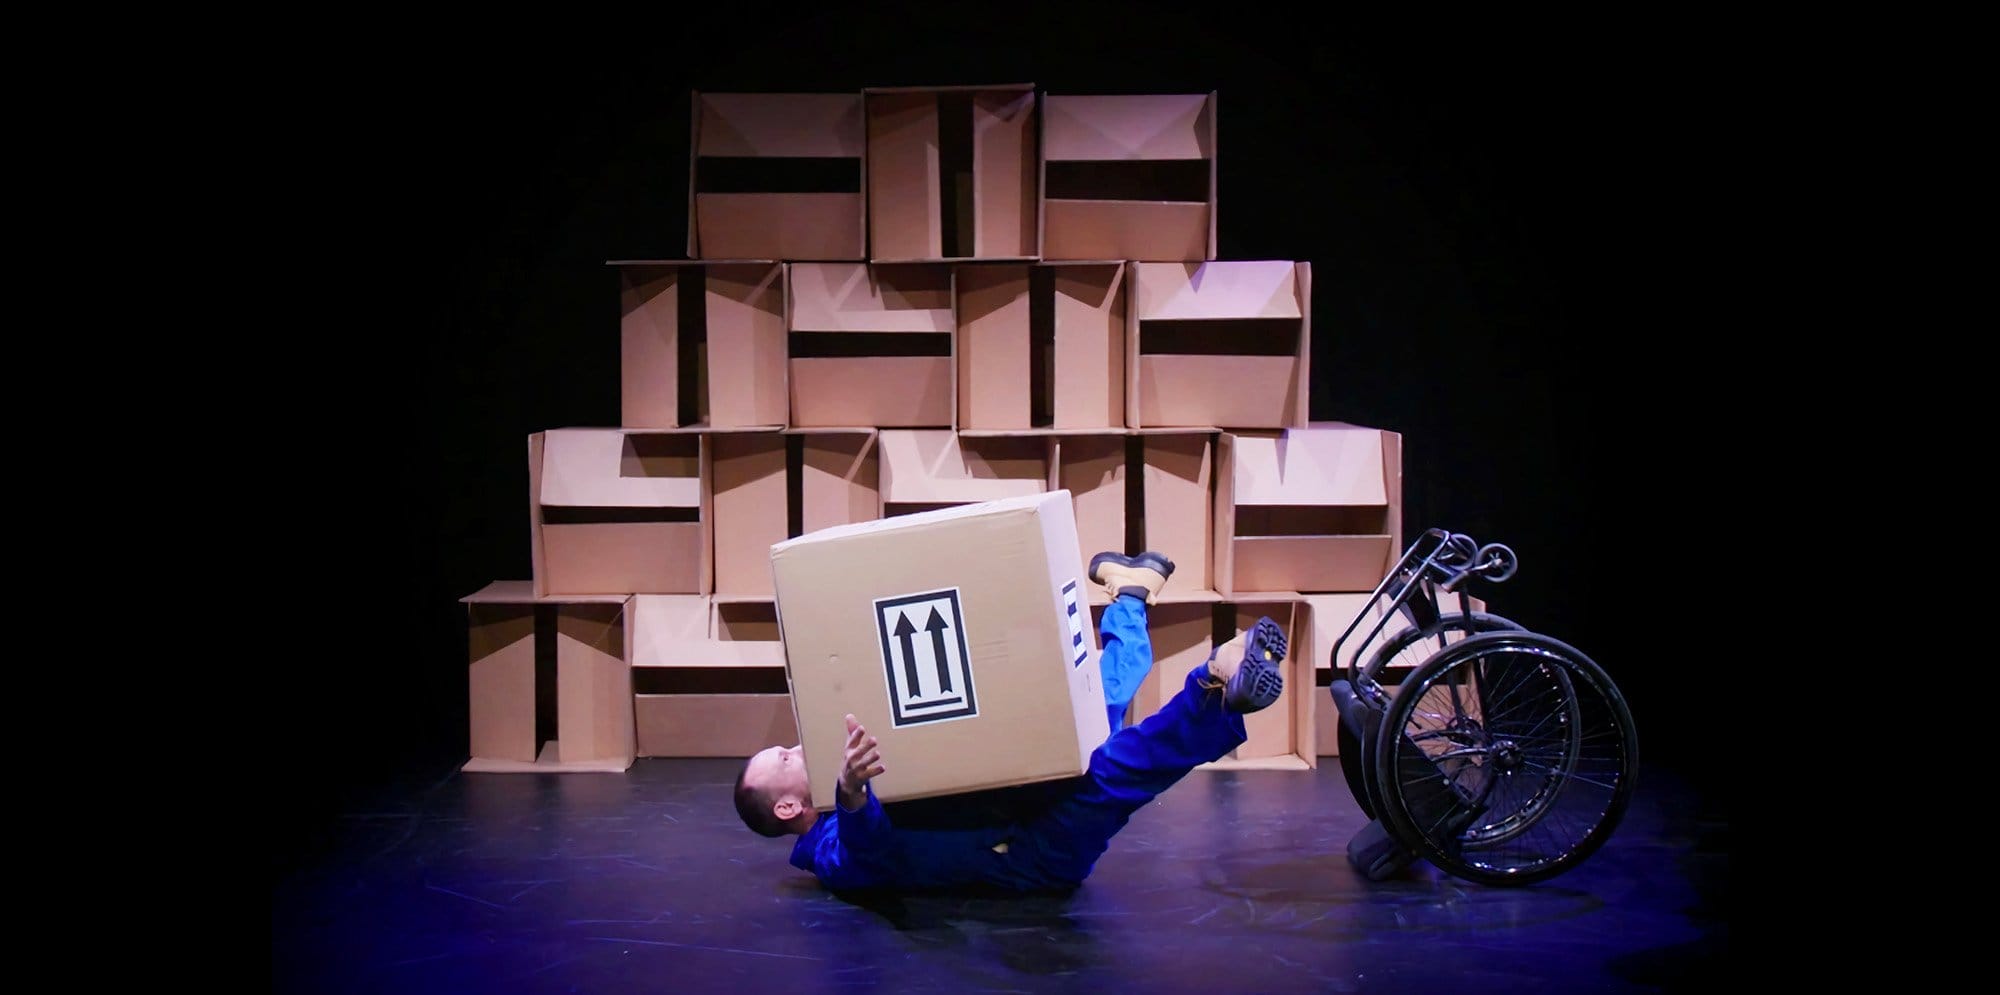 A man wearing a blue jumpsuit laying on the floor with a cardboard box ontop of him. Behind is a wall of cardboard boxes